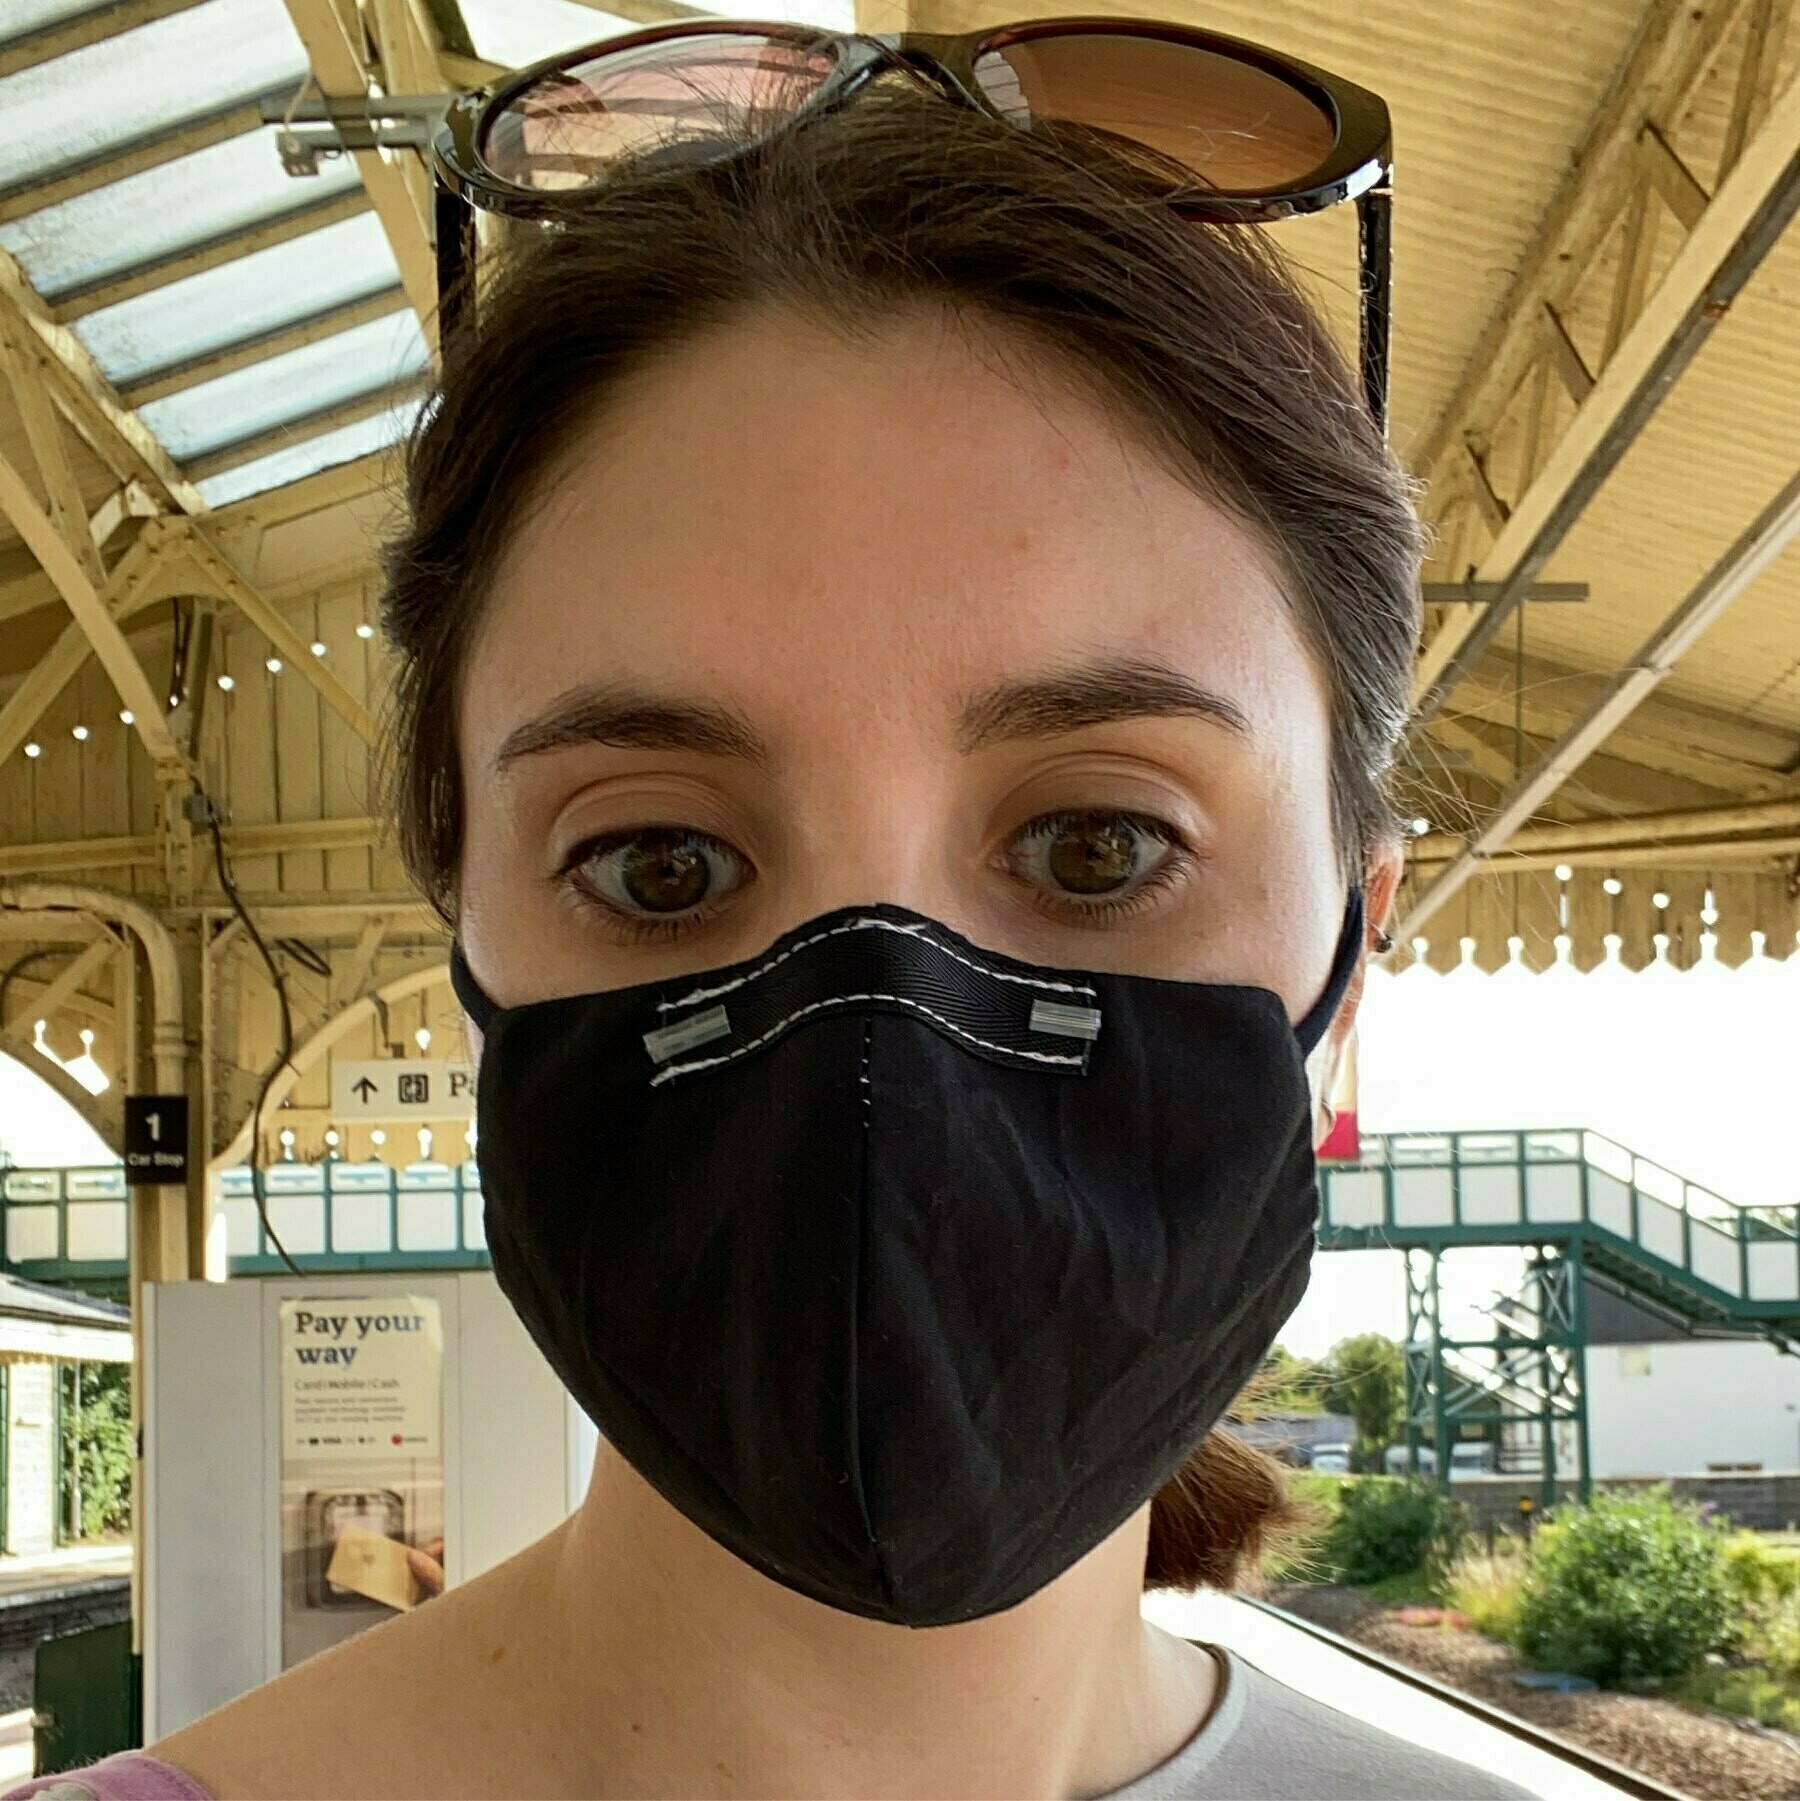 Me, wearing a black fabric mask at a train station